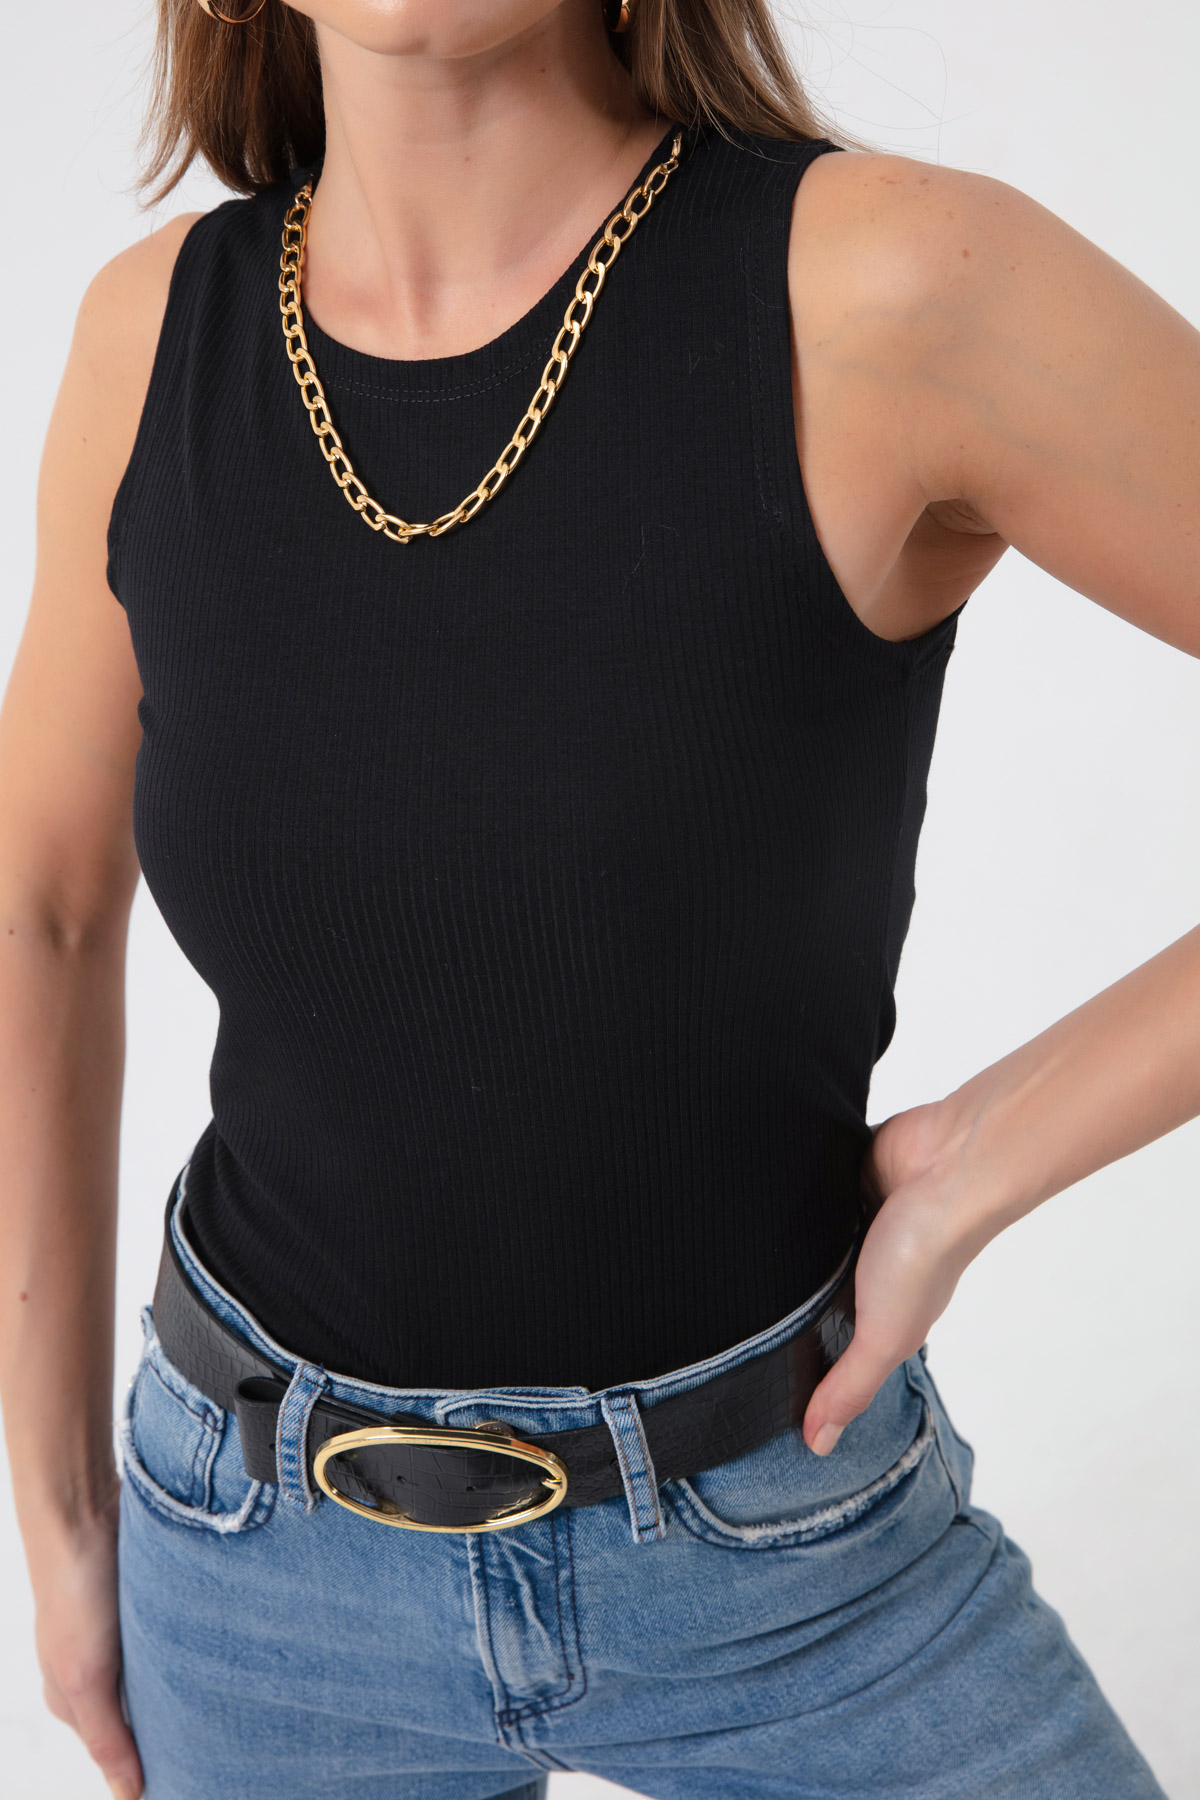 Women's Black Necklace Knitted Blouse